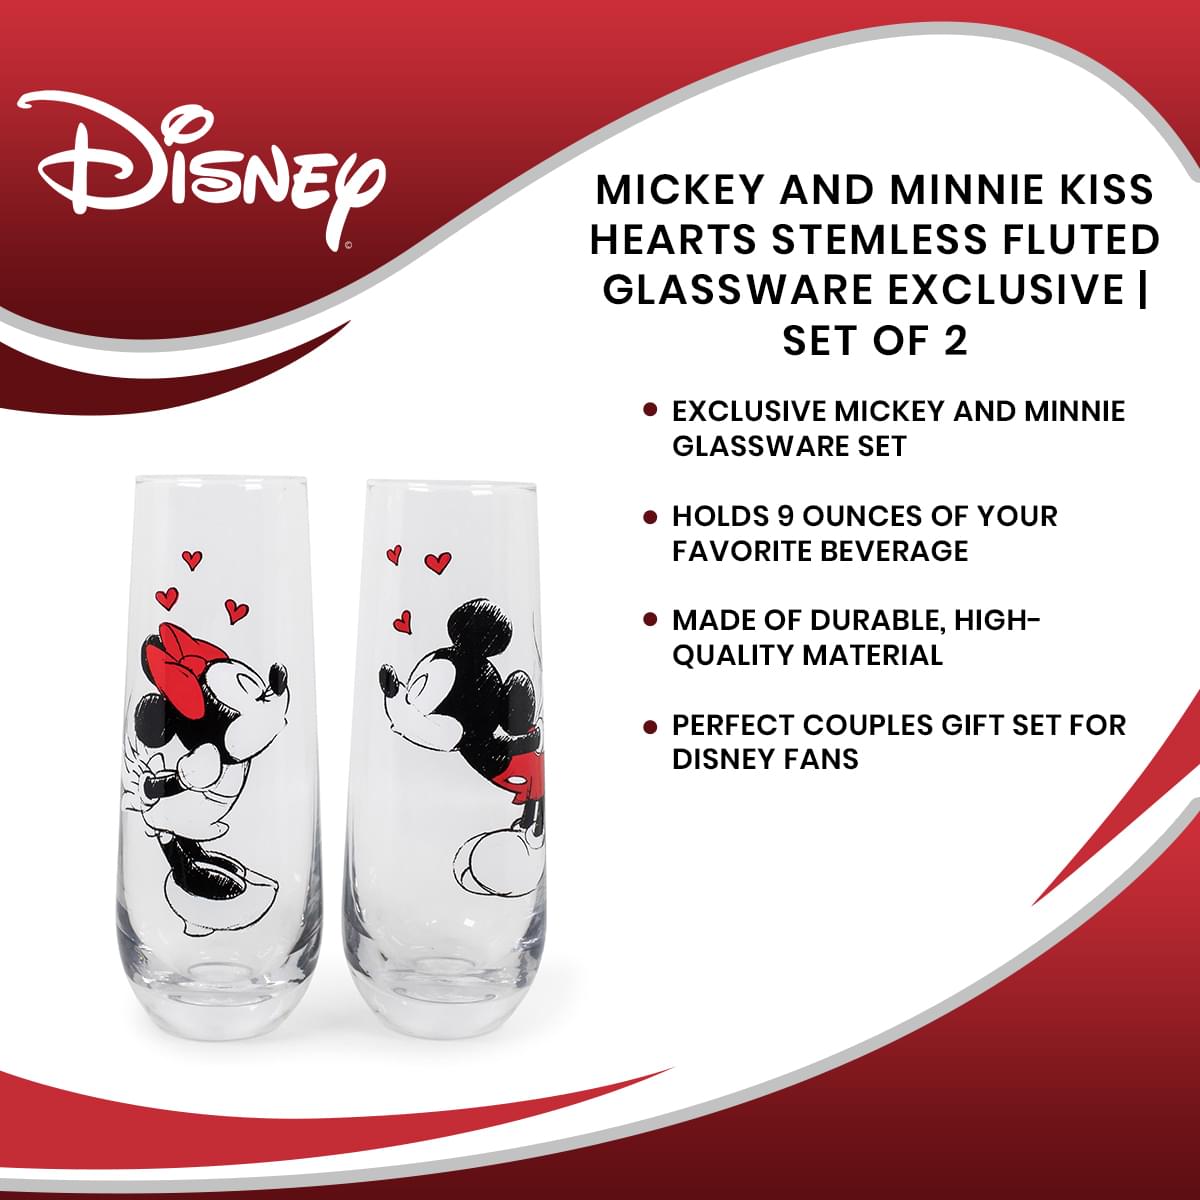 Mickey and Minnie Kiss Hearts Stemless Fluted Glassware Exclusive | Set of 2